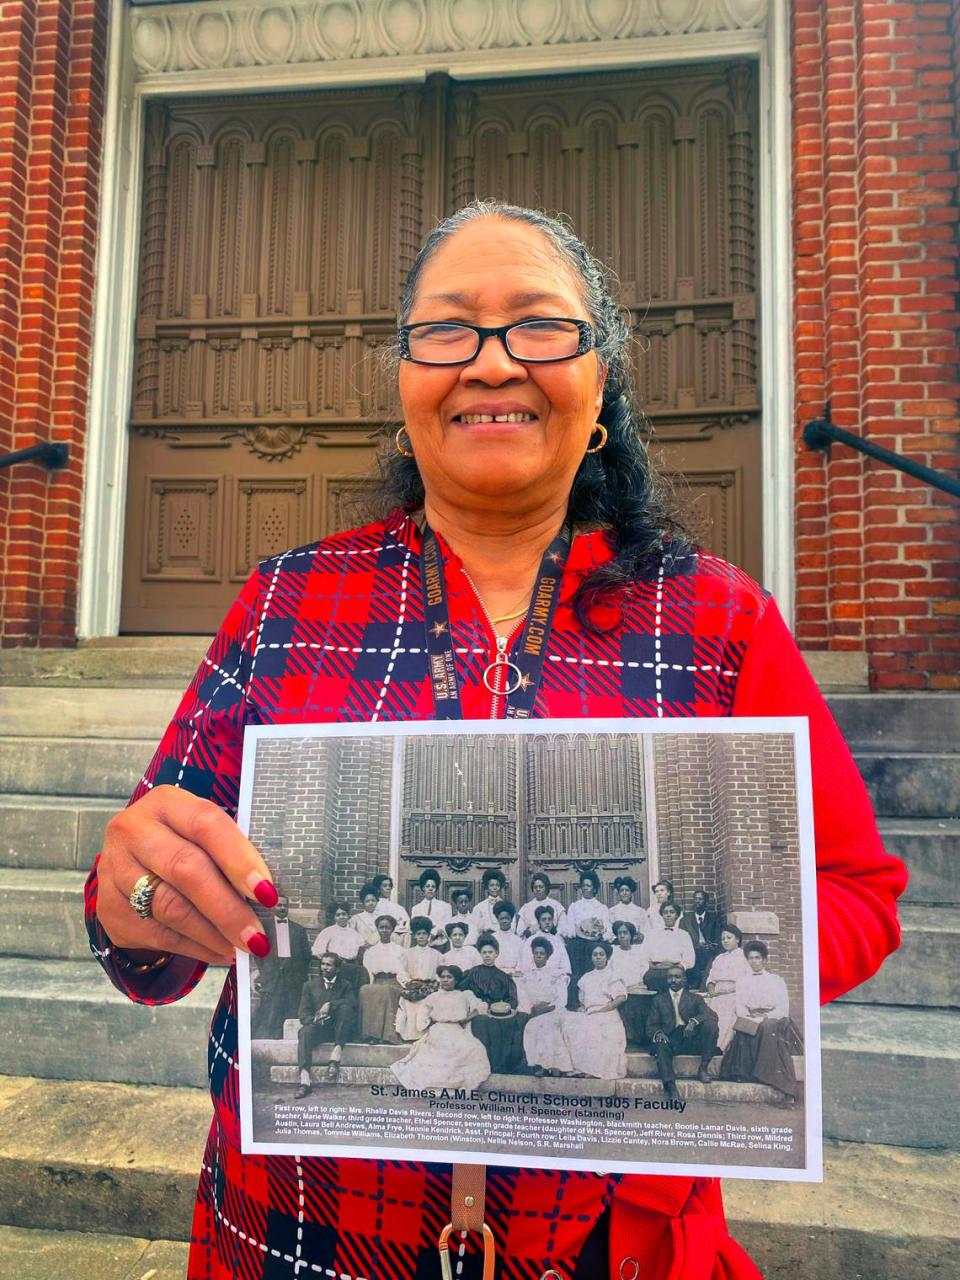 Carolyn Hensley, the church historian at Saint James A.M.E. Church in Columbus, Georgia, holds a photograph of the 1905 faculty of the church’s school. 02/16/2024